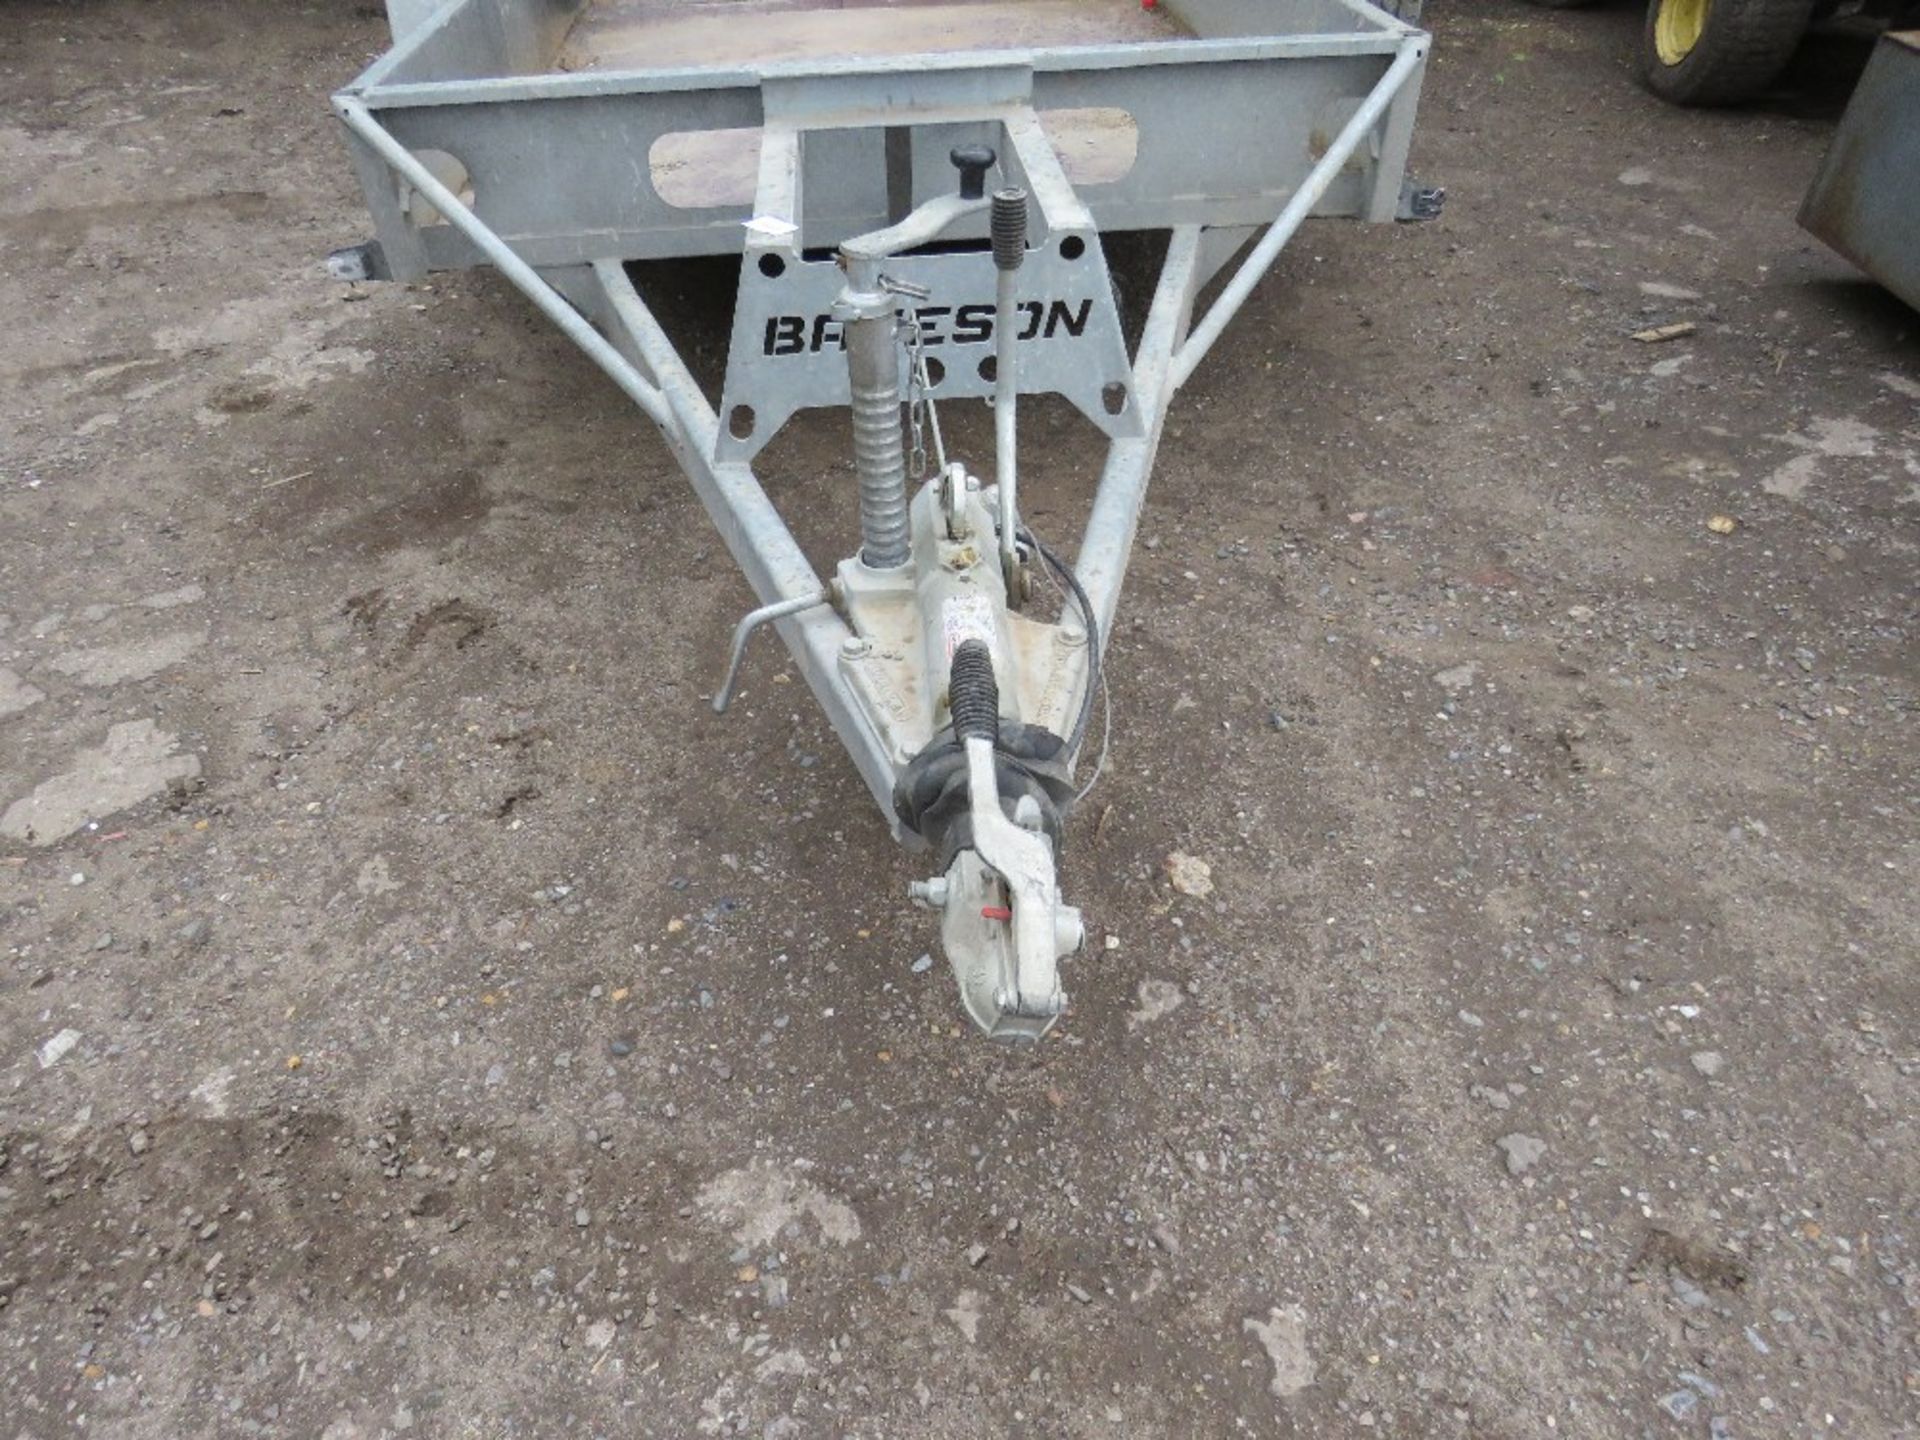 BATESON 3500KG RATED HEAVY DUTY PLANT TRAILER, INTERNAL SIZE 5.5FT X 9FT 6" APPROX - Image 2 of 8